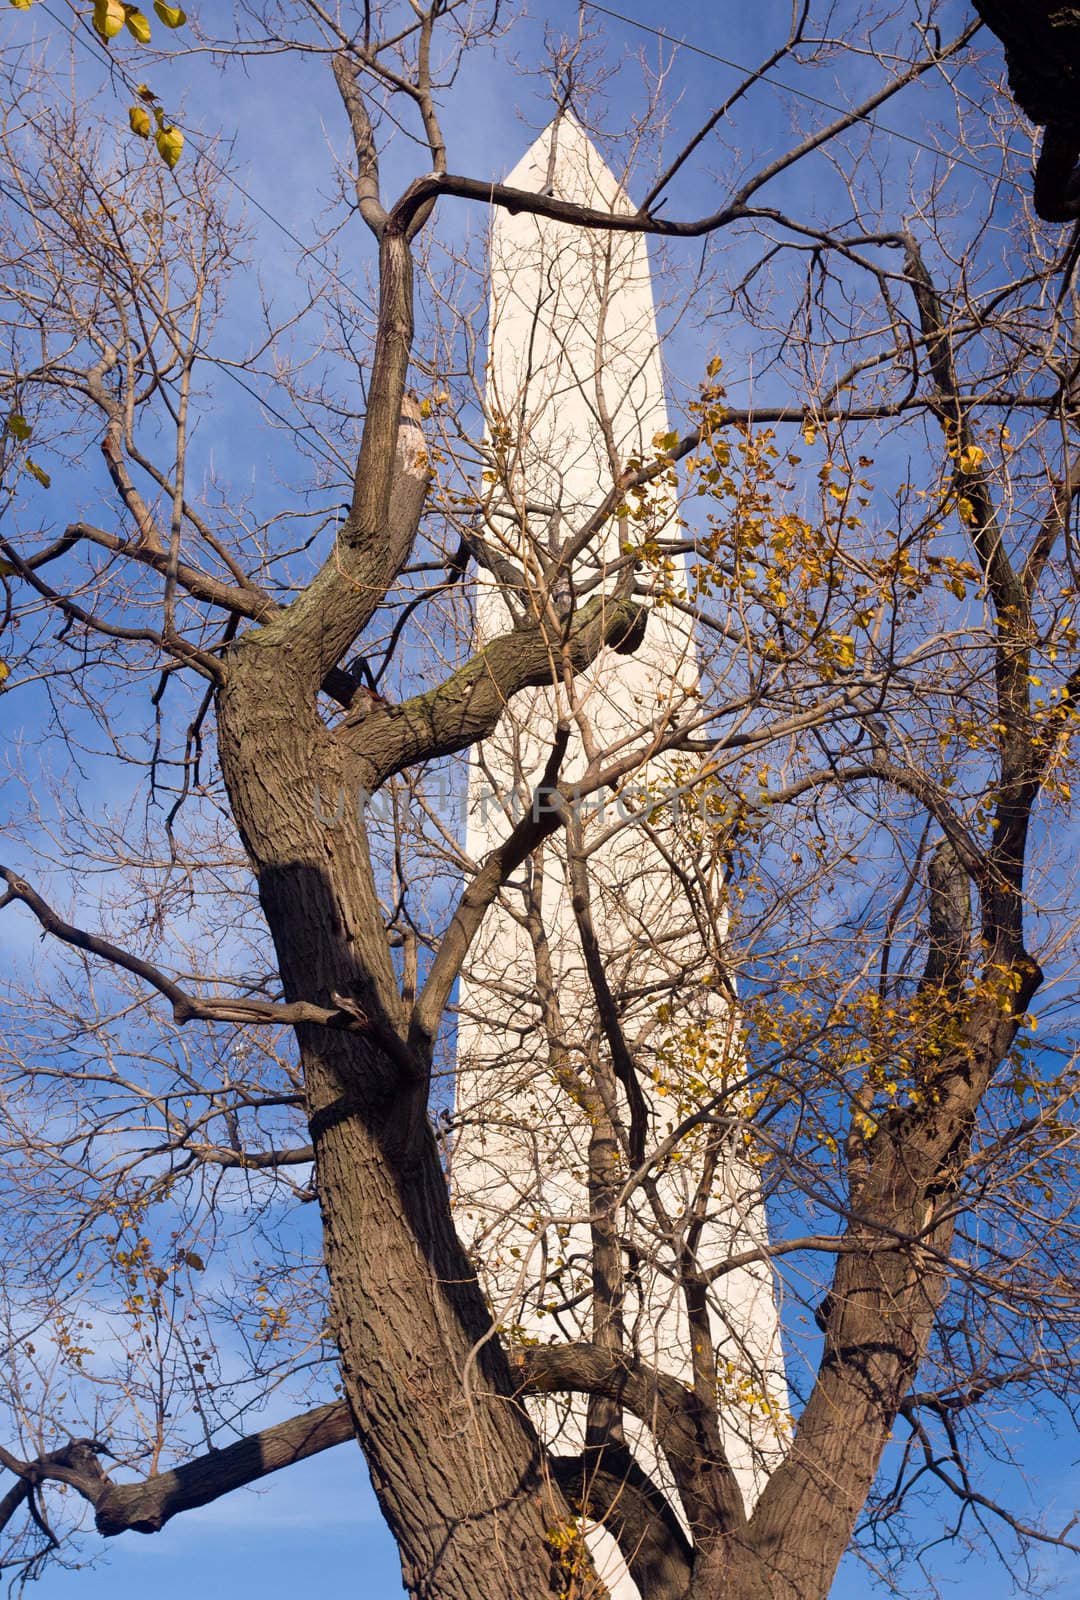 Washington Monument in DC on a clear winter day behind old branches of tree on the Mall